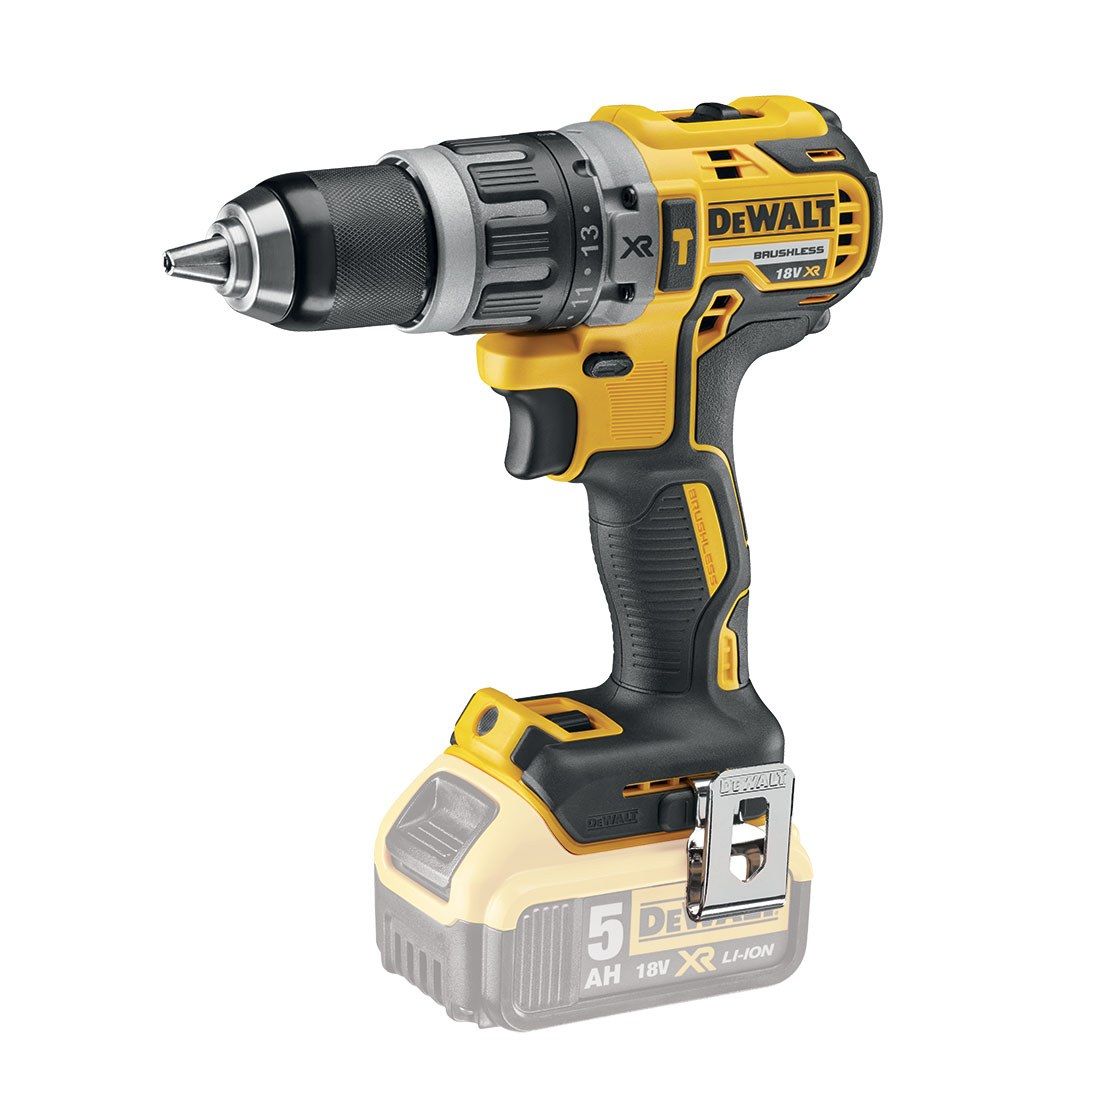 DeWalt DCD796P2-GB 18V XR Brushless Compact Combi Drill with 2 x 5 A Lithium-Ion Batteries and 1 x TSTAK Heavy-Duty Kitbox.